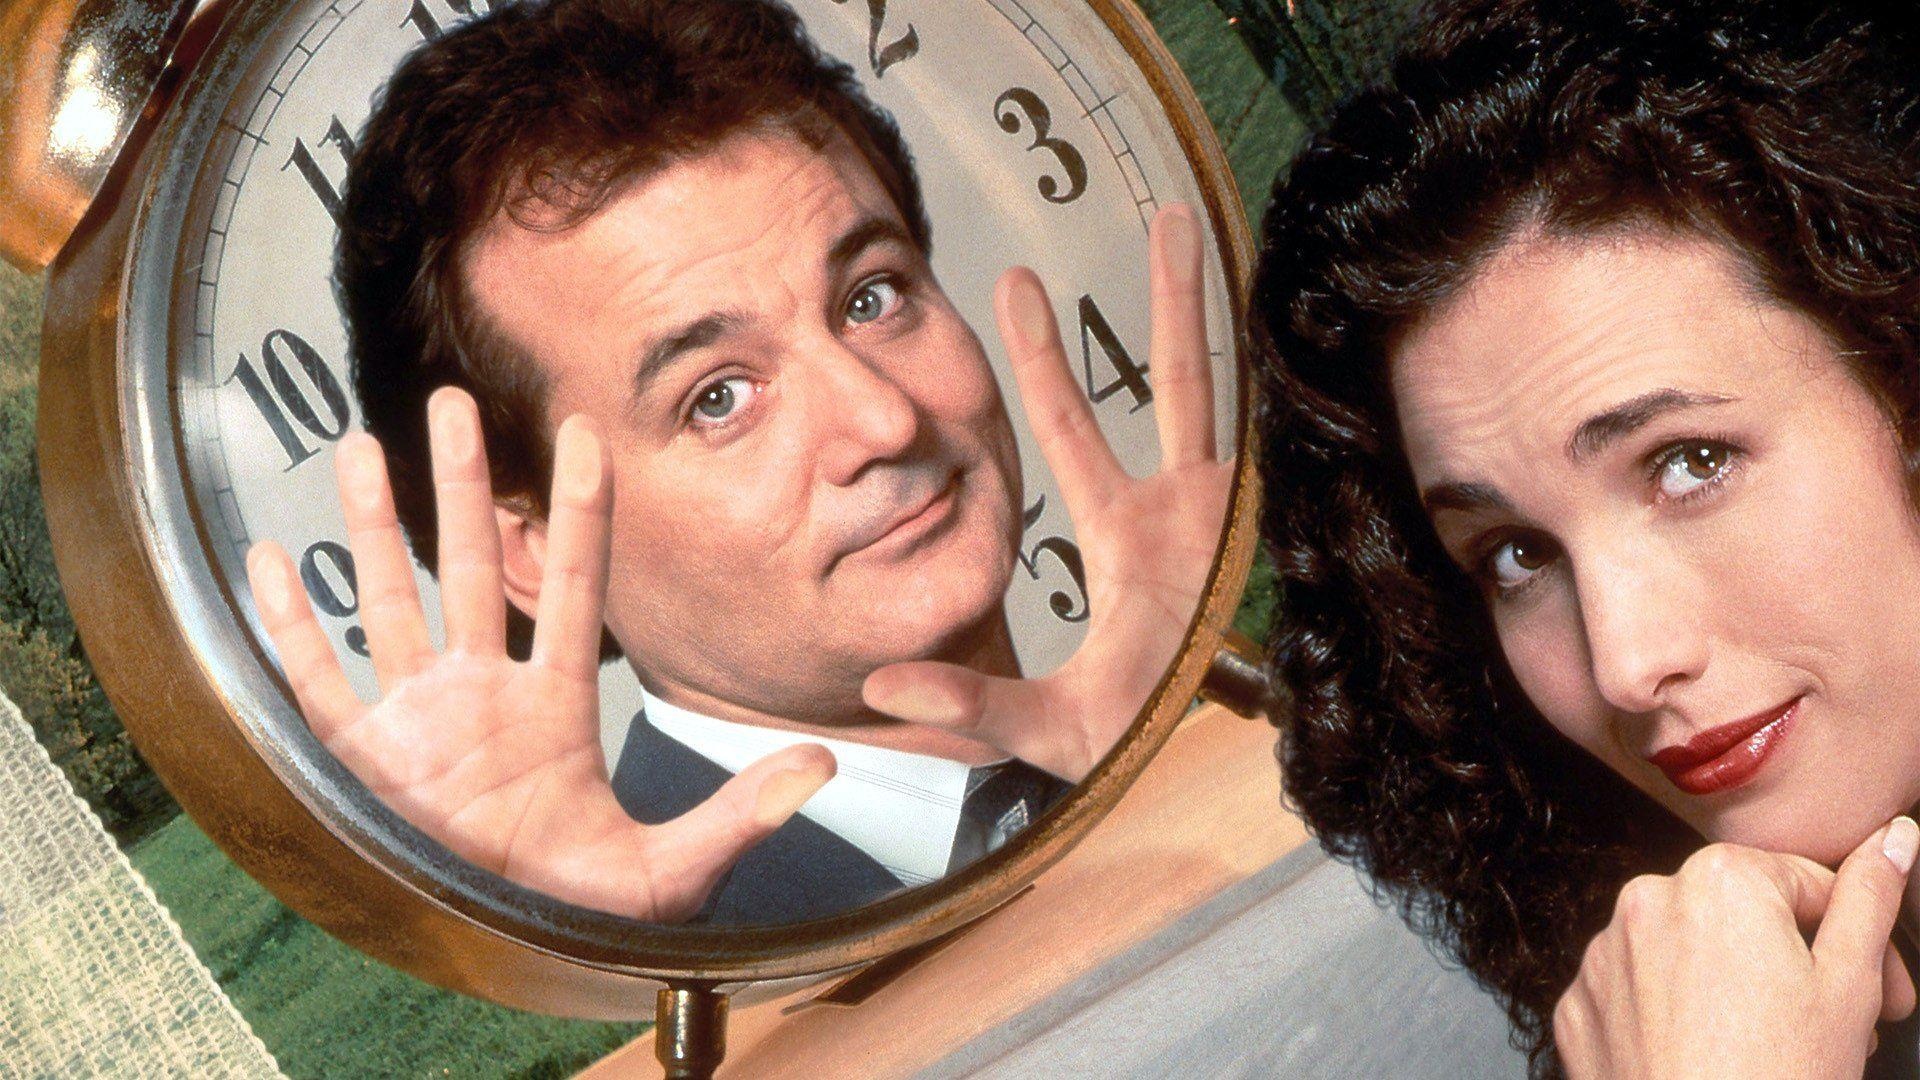 Groundhog Day (Movie): A cynical television weatherman who becomes trapped in a time loop. 1920x1080 Full HD Wallpaper.